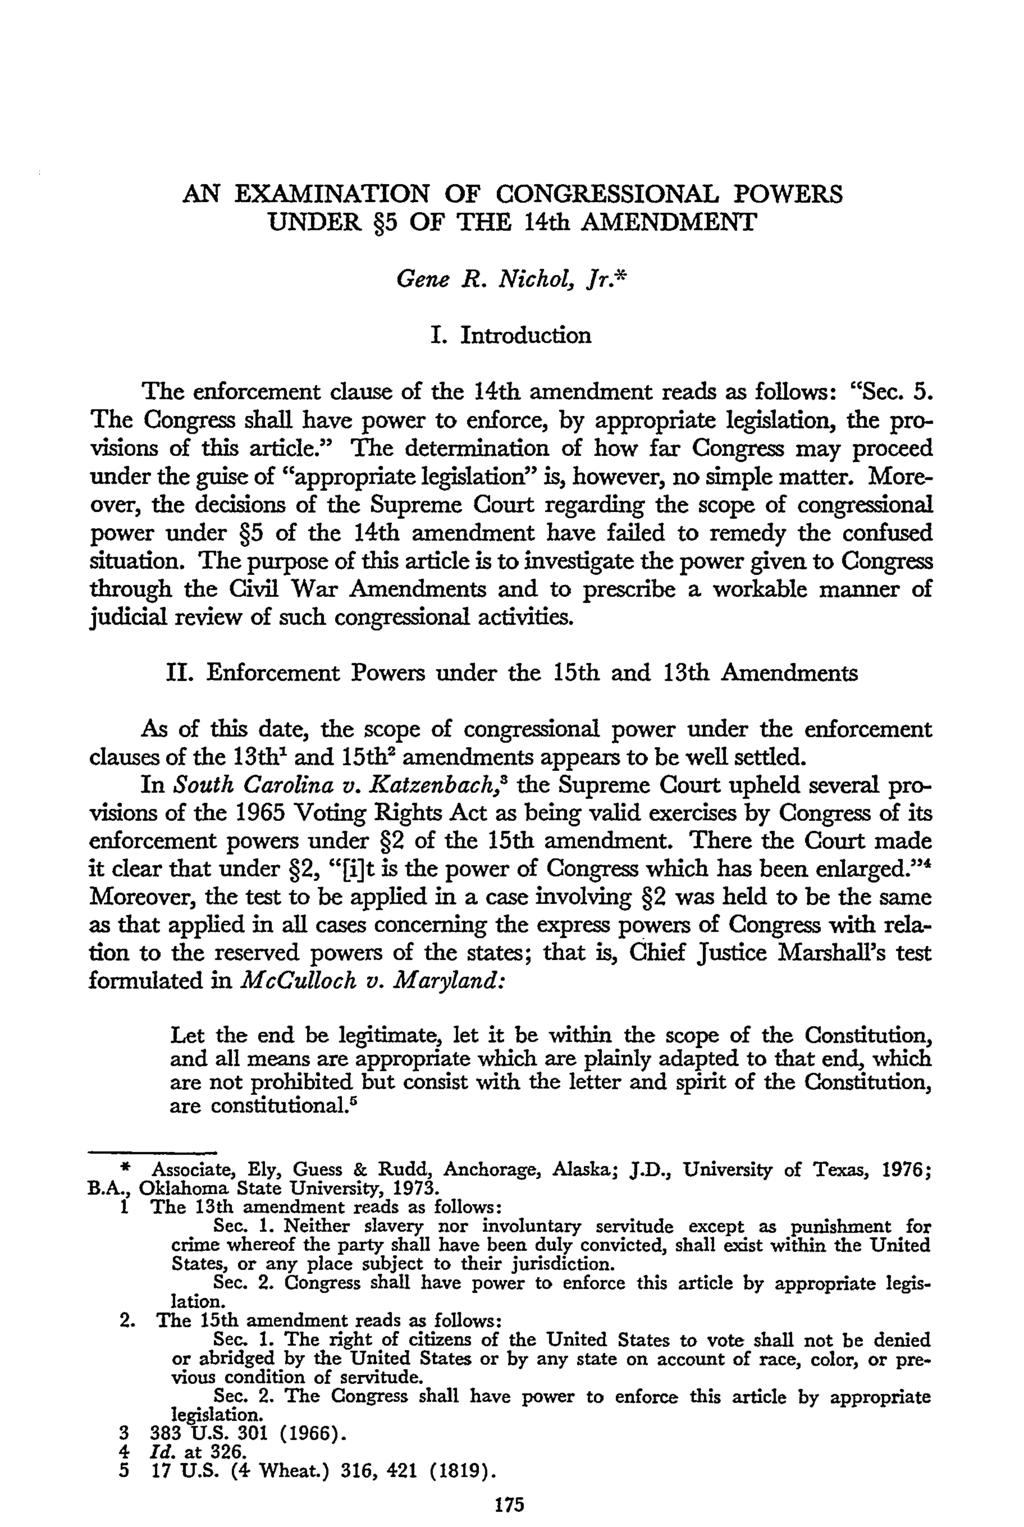 AN EXAMINATION OF CONGRESSIONAL POWERS UNDER 5 OF THE 14th AMENDMENT Gene R. Nichol, Jr.* I. Introduction The enforcement clause of the 14th amendment reads as follows: "Sec. 5. The Congress shall have power to enforce, by appropriate legislation, the provisions of this article.